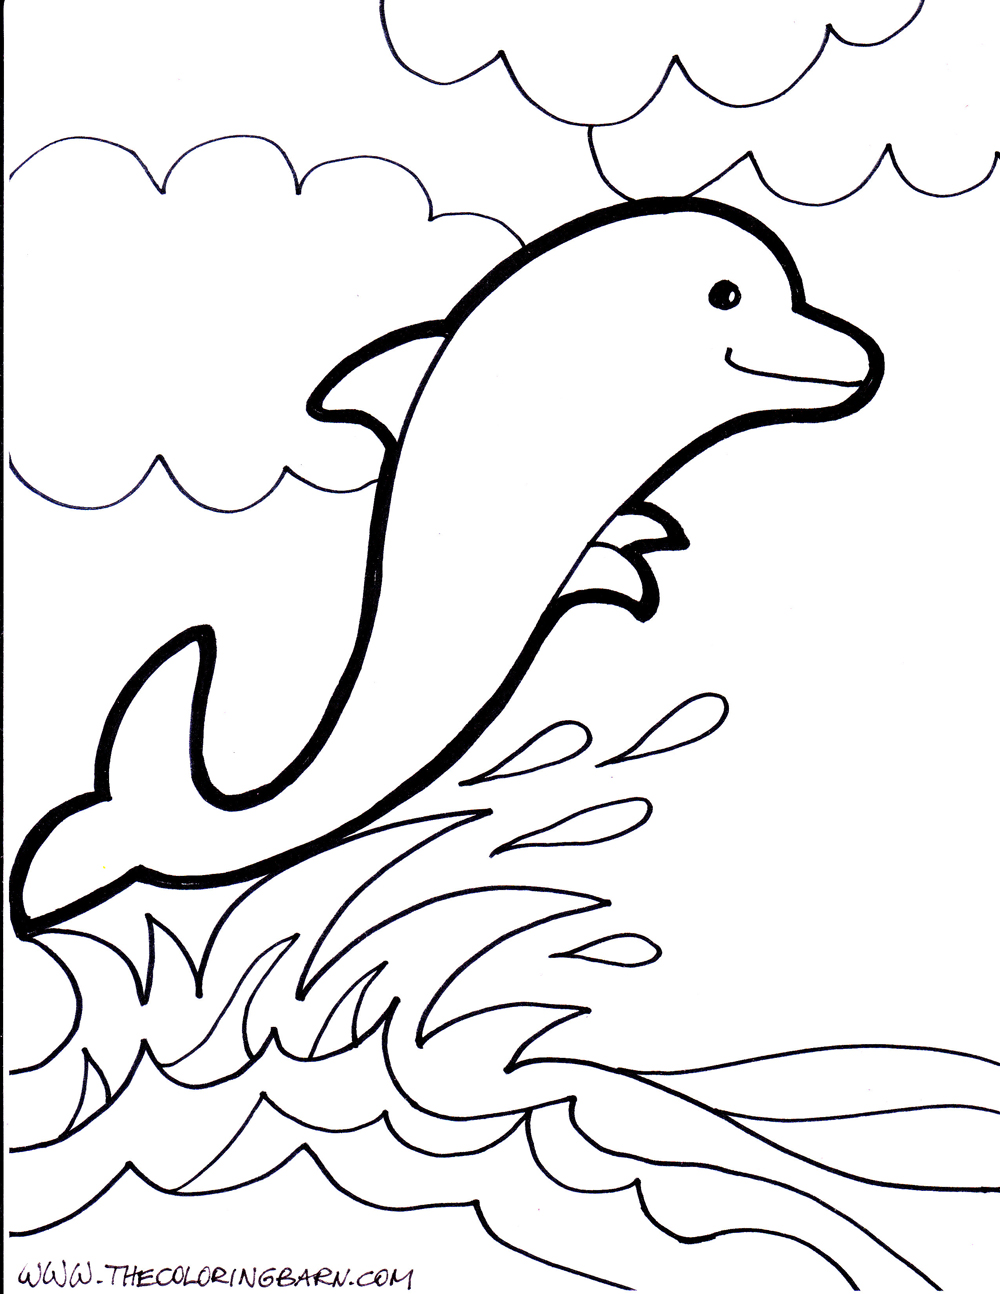 Dolphin Coloring Pages - The Coloring Barn